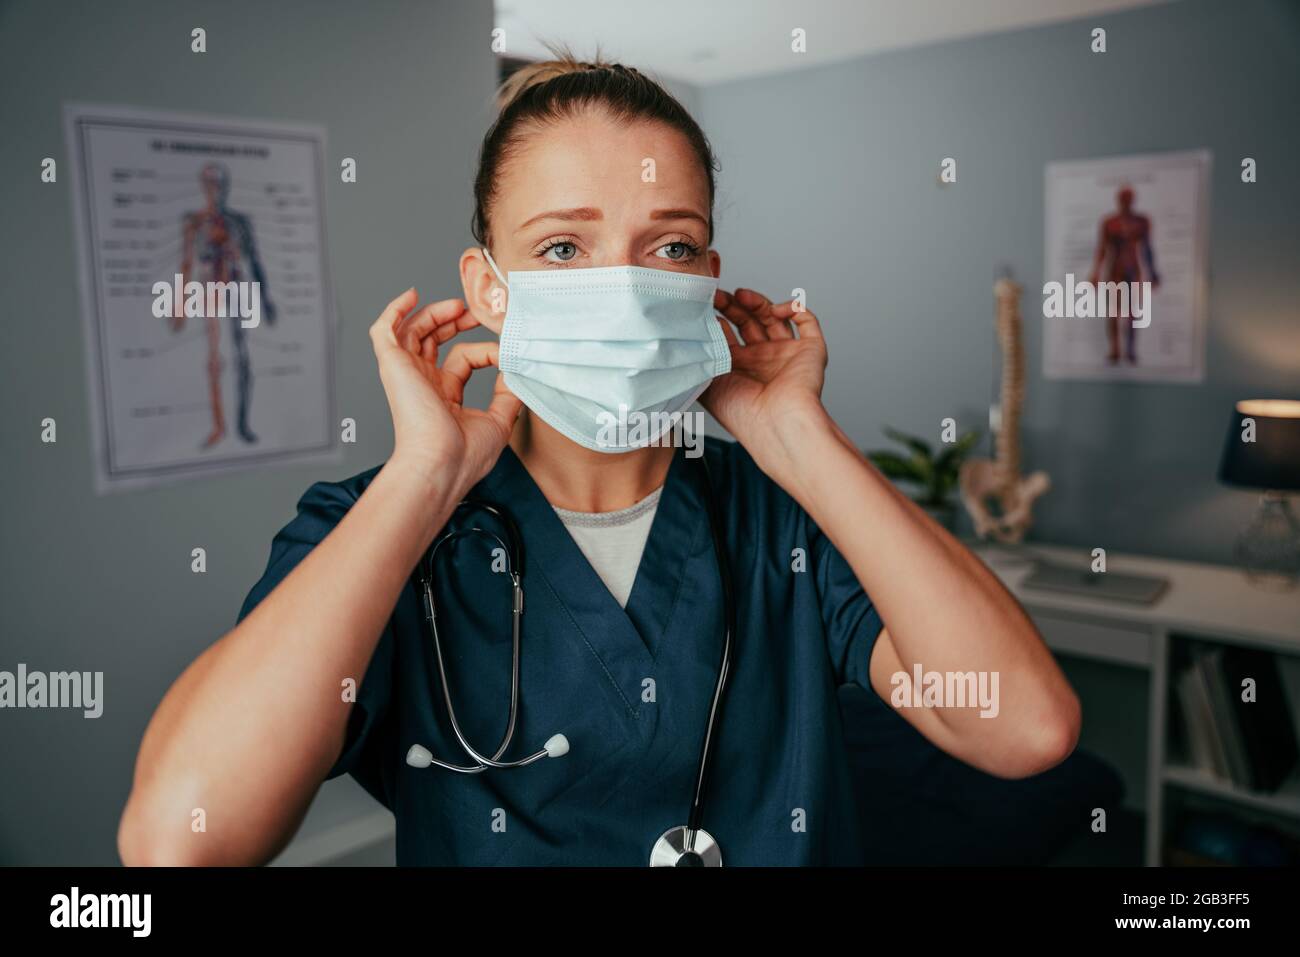 Caucasian female nurse wearing surgical mask standing in doctors clinic Stock Photo